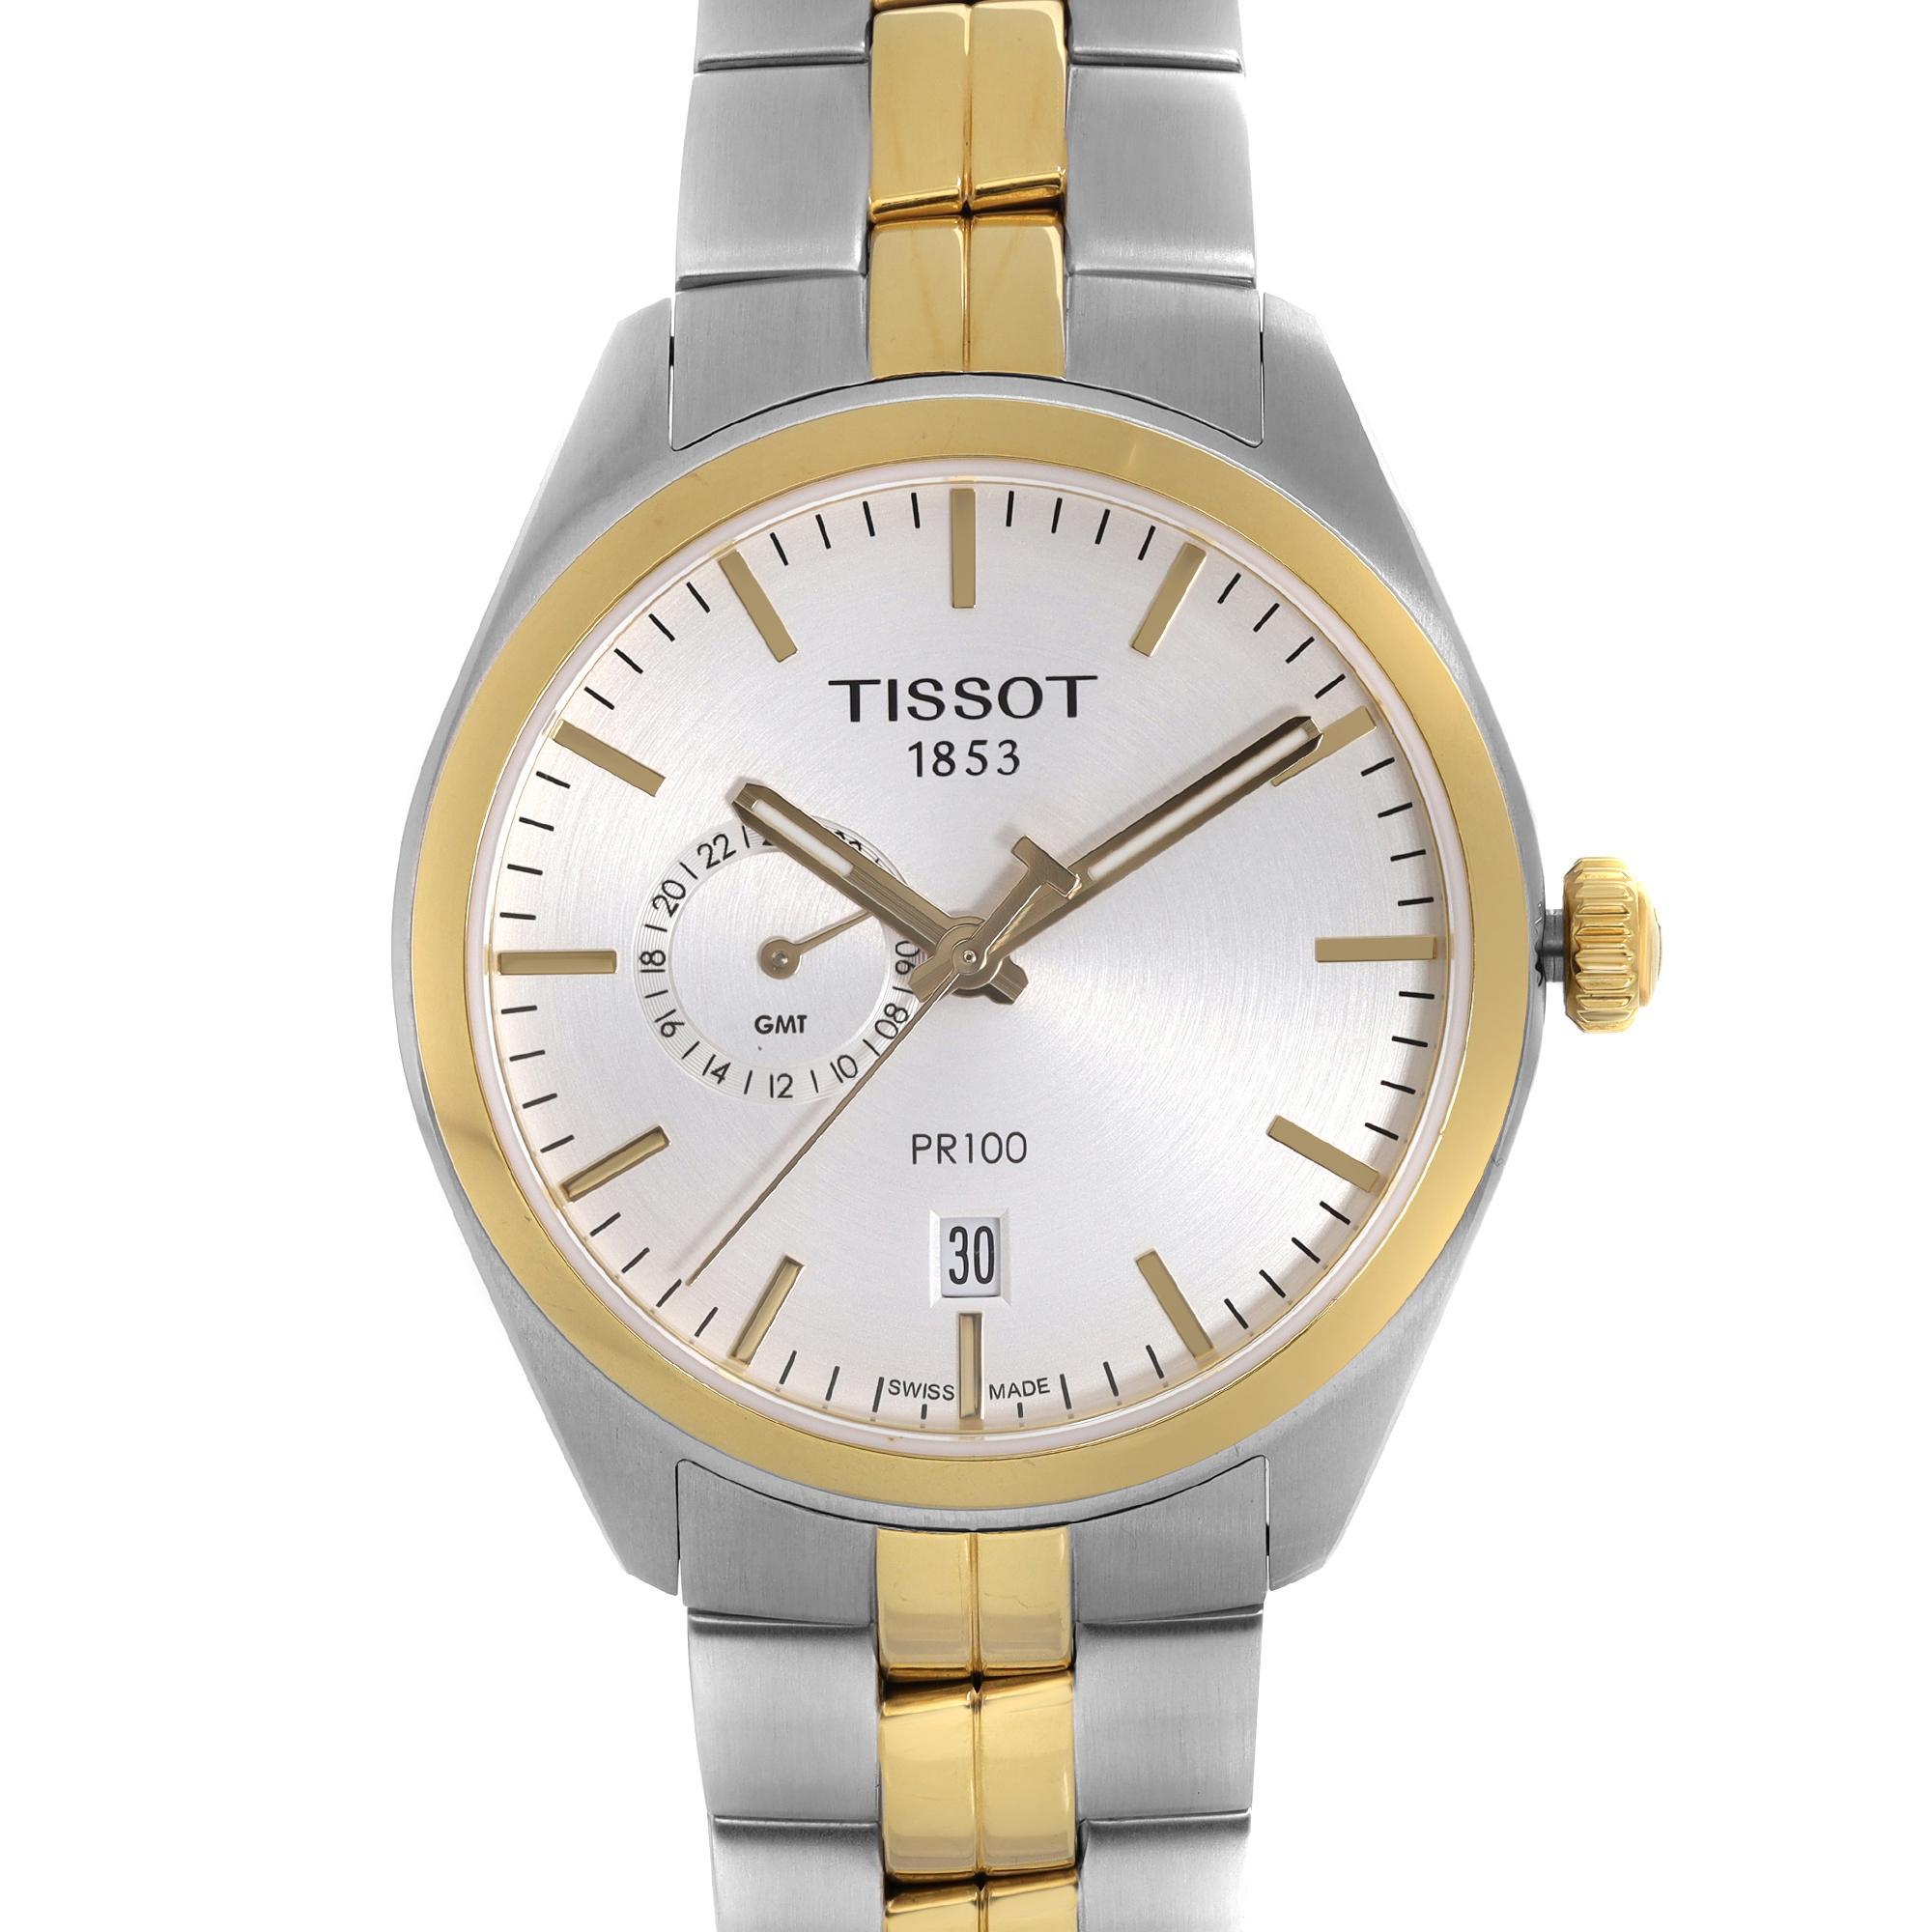 Display Tissot PR100 Dual Time Two-Tone Steel Silver Dial Mens Quartz Watch T101.452.22.031.00. The Watch may have minor marks on the bezel or bracelet due to storing. This Beautiful Timepiece Features: Stainless Steel Case with a Two-Tone Stainless